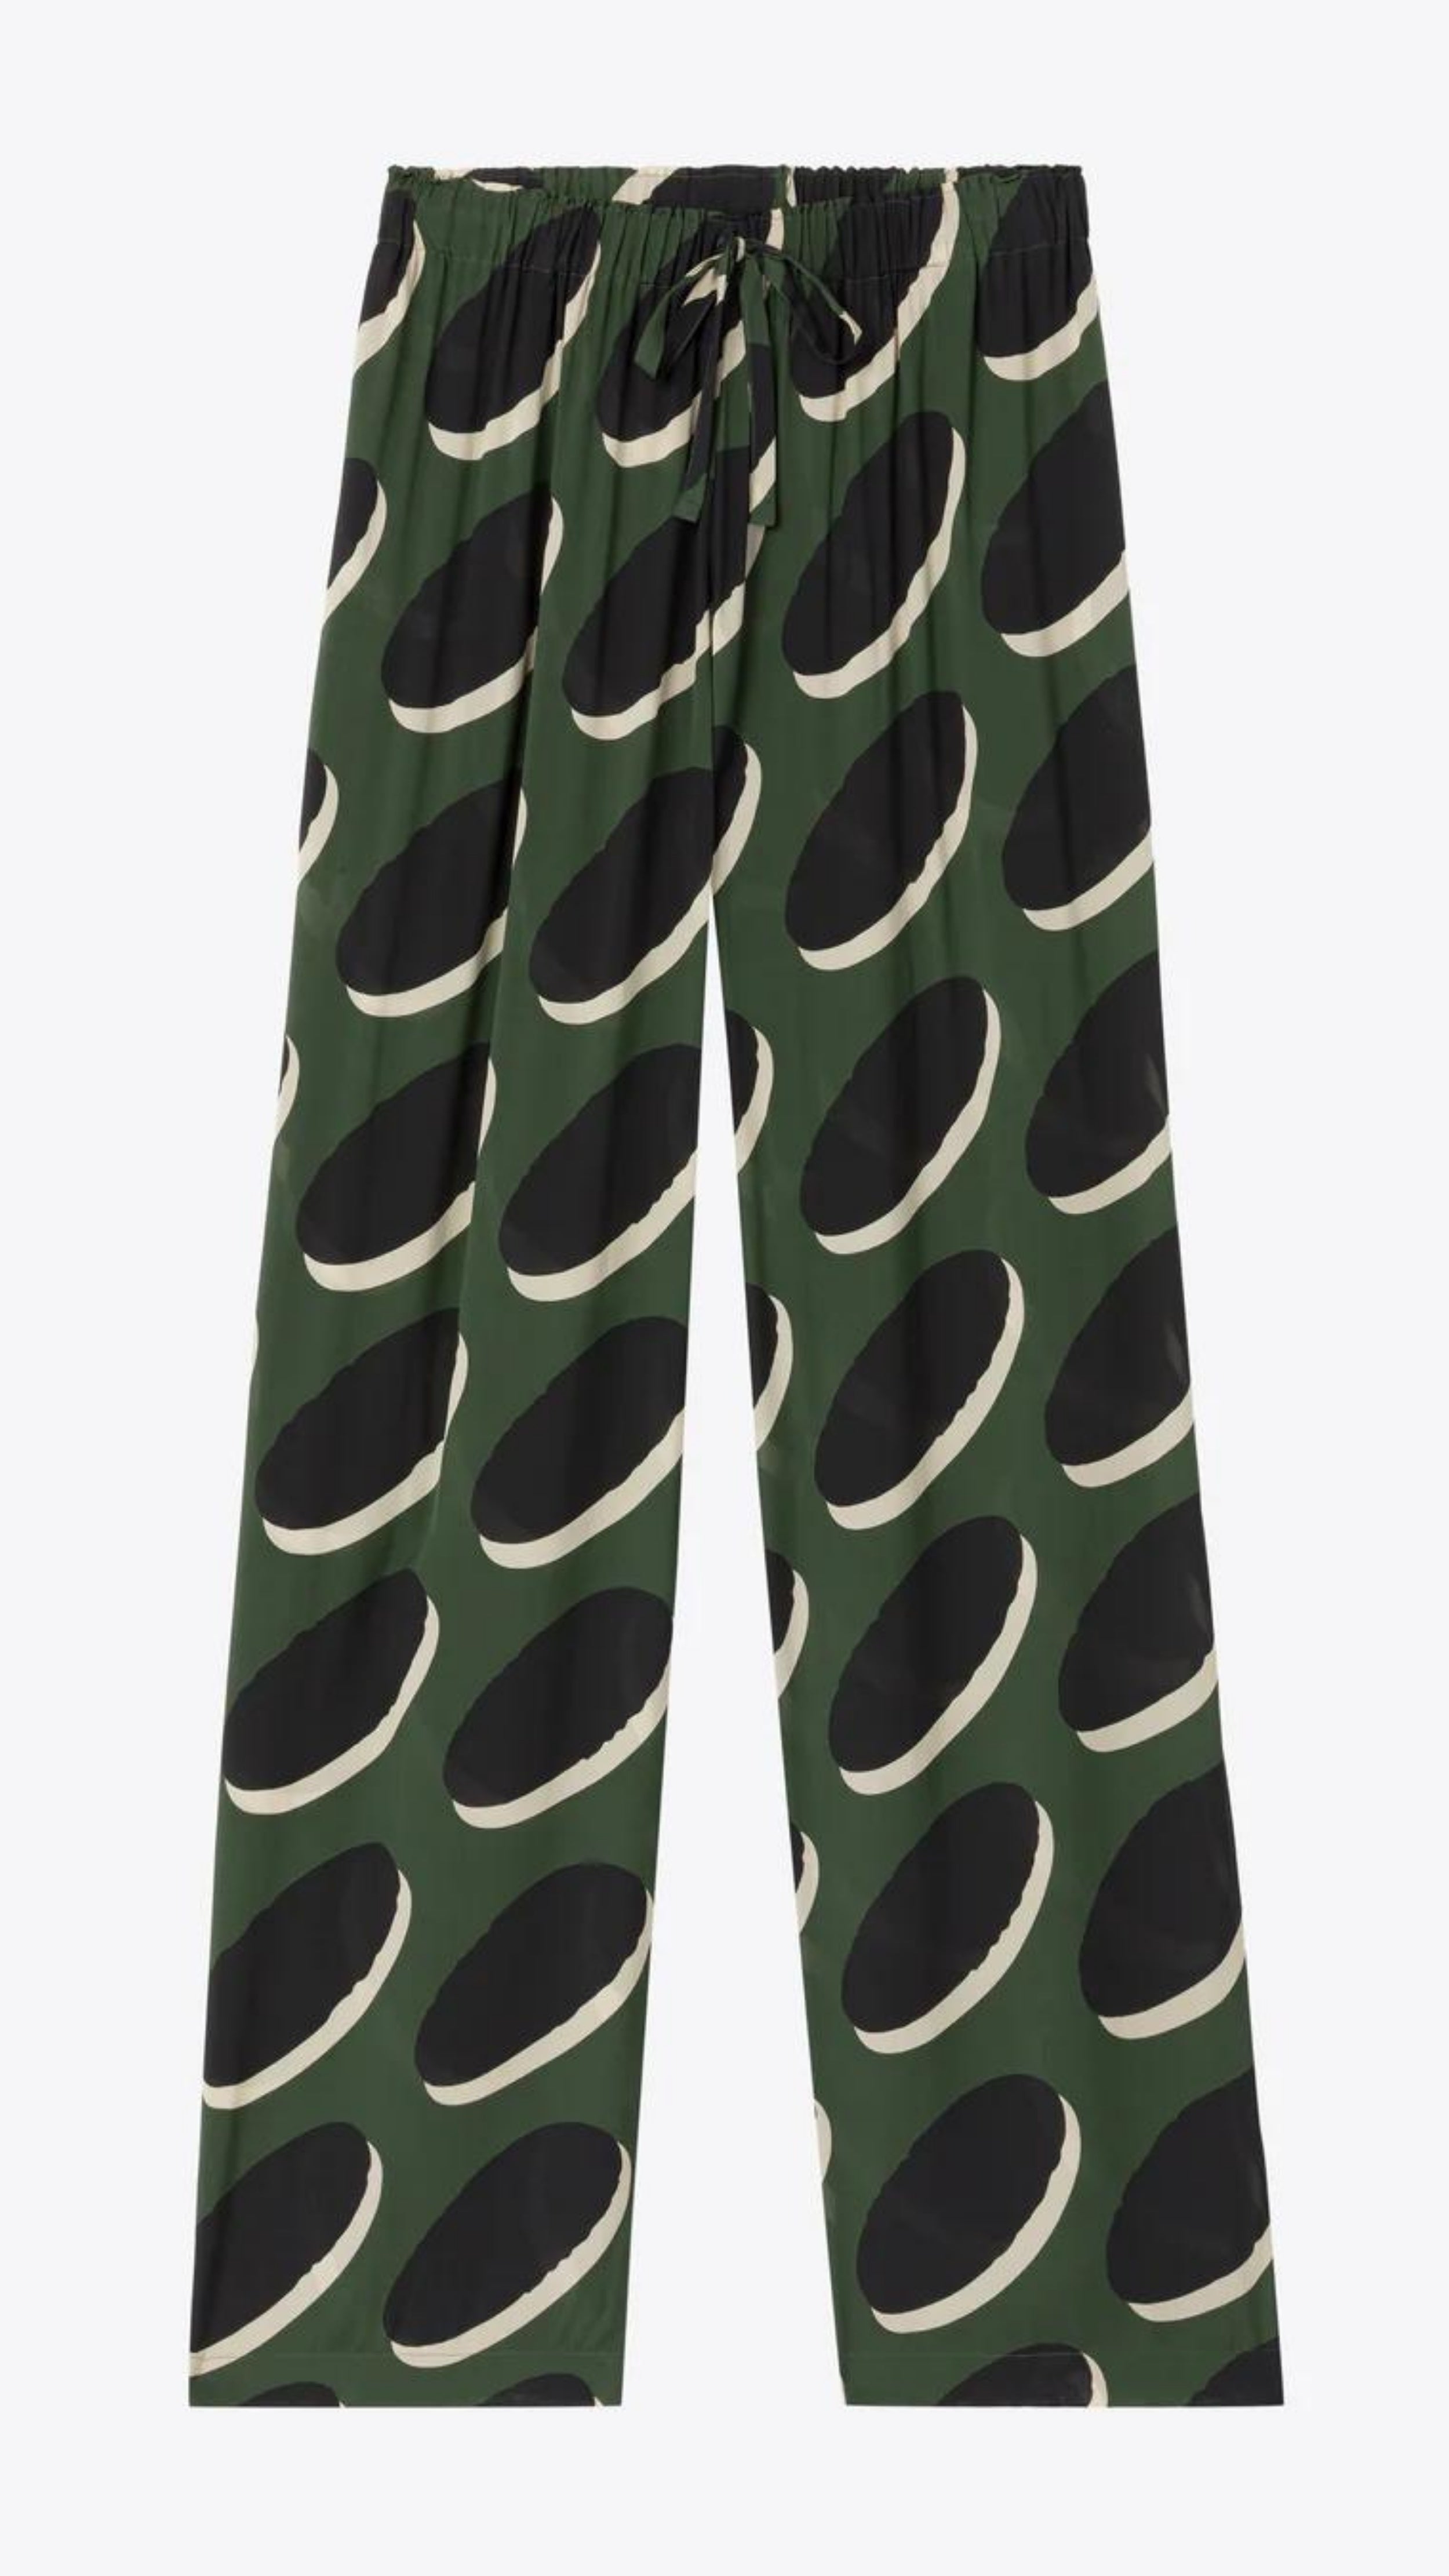 AZ Factory Colville Molly Molloy Lucinda Chambers, Pajama Pants in Khaki Macaroon Pajama loose style silky pants with elastic and drawstring waist band. Crafted in olive green with black and ecru oval pattern. Product flat photo